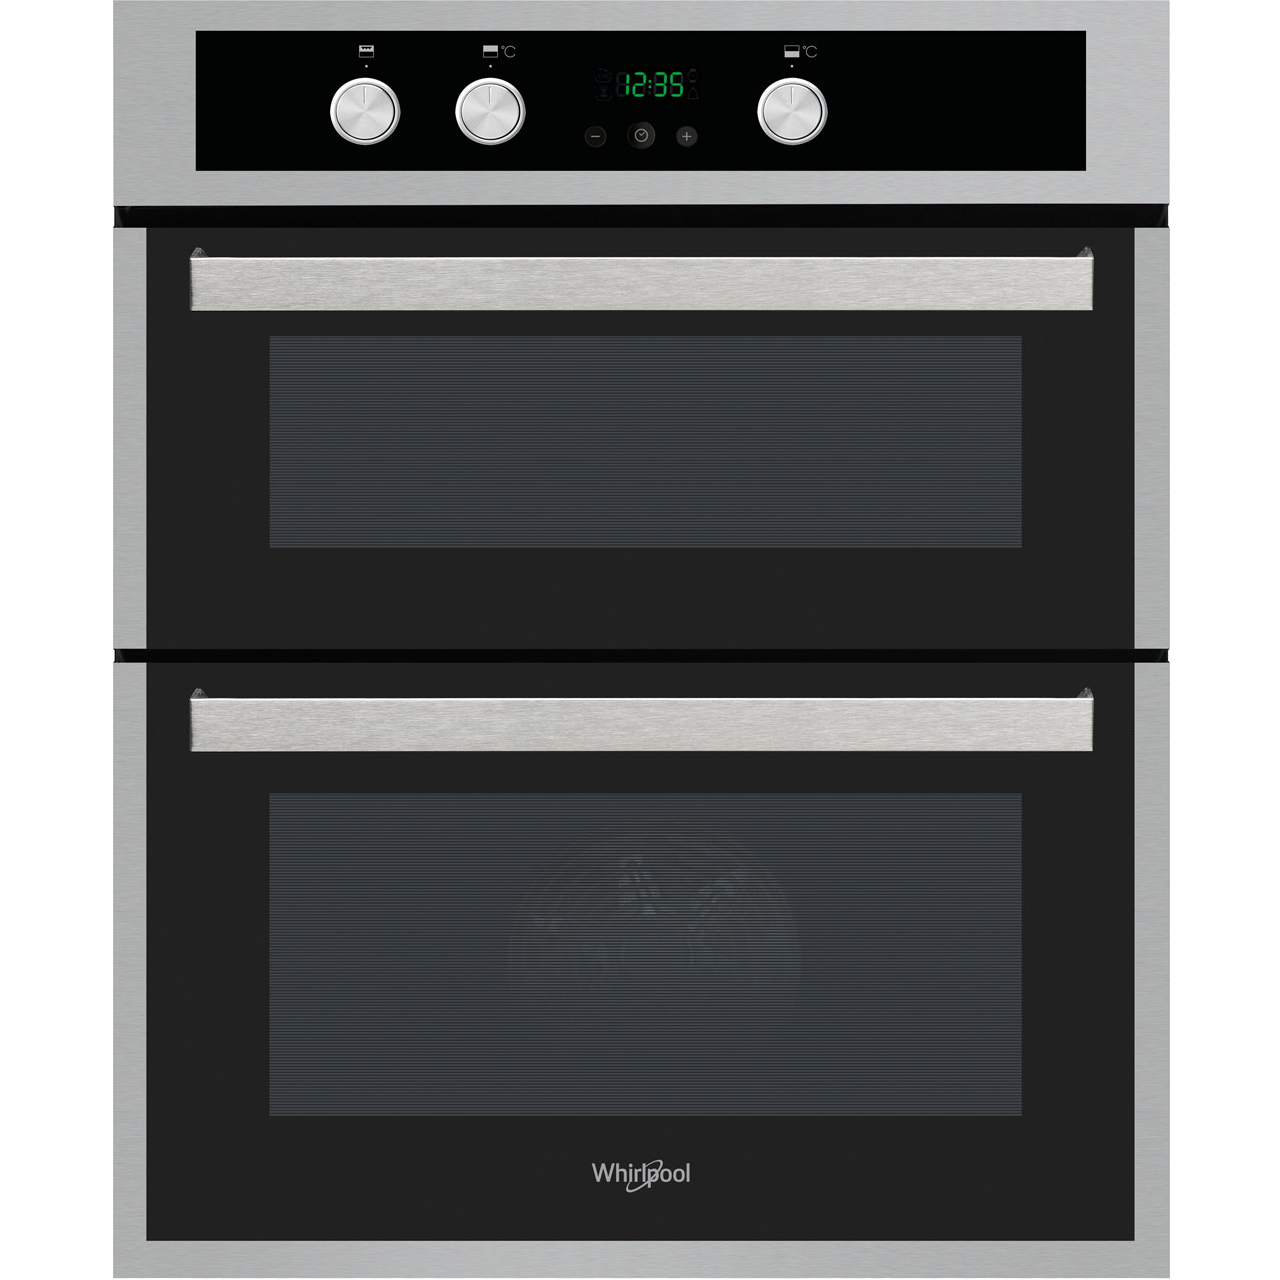 Whirlpool AKL307IX Built Under Double Oven With Feet Review